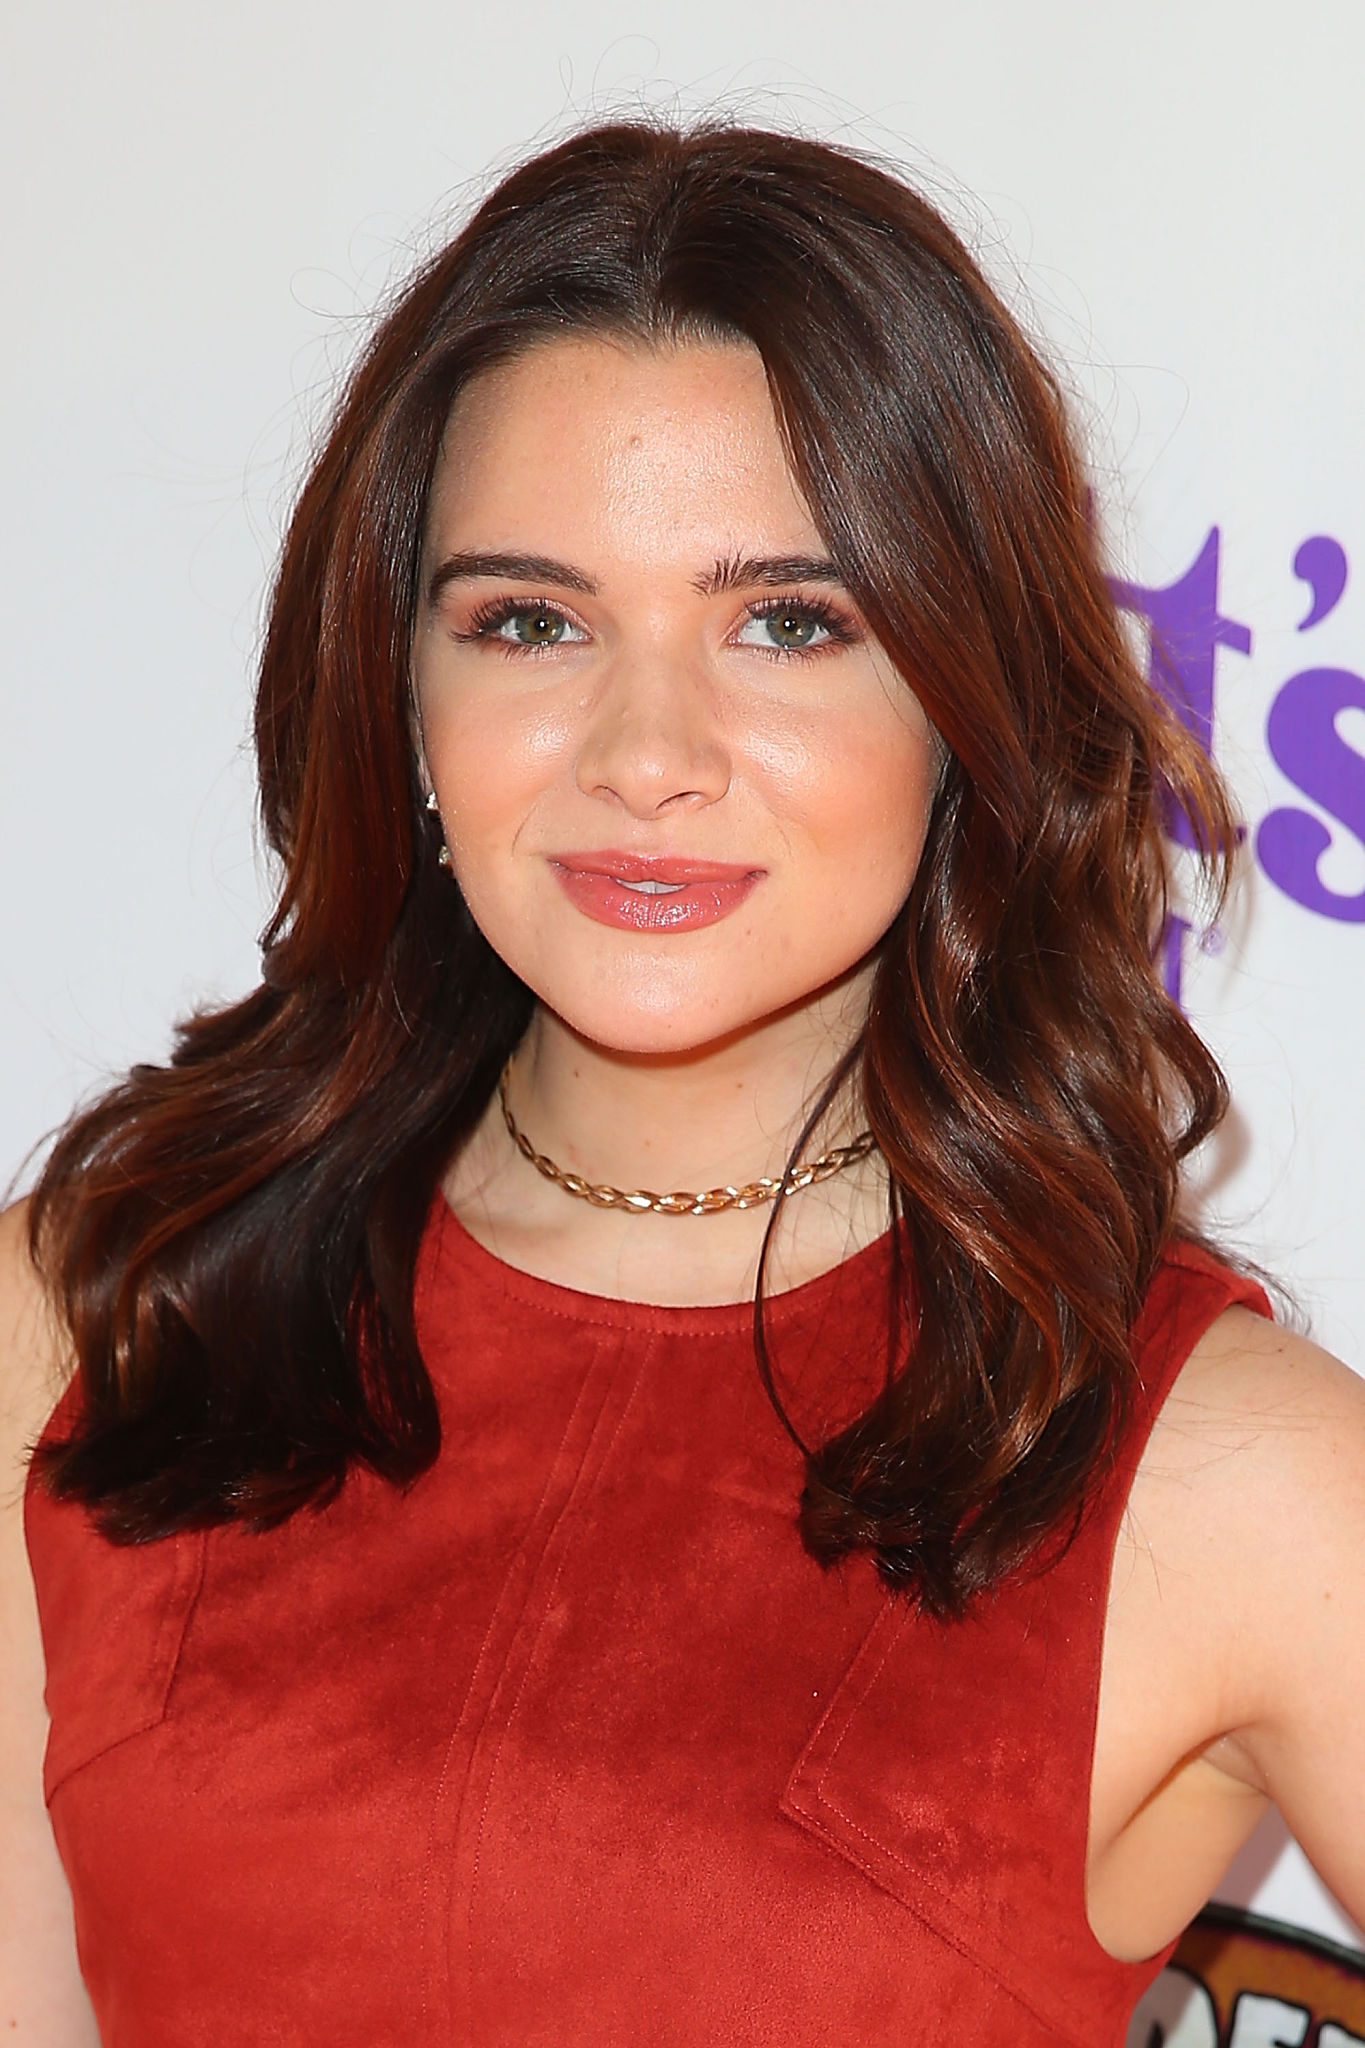 katie-stevens-ghostrider-reopening-at-knotts-berry-farm-on-642016-in-buena-park-california.jpg